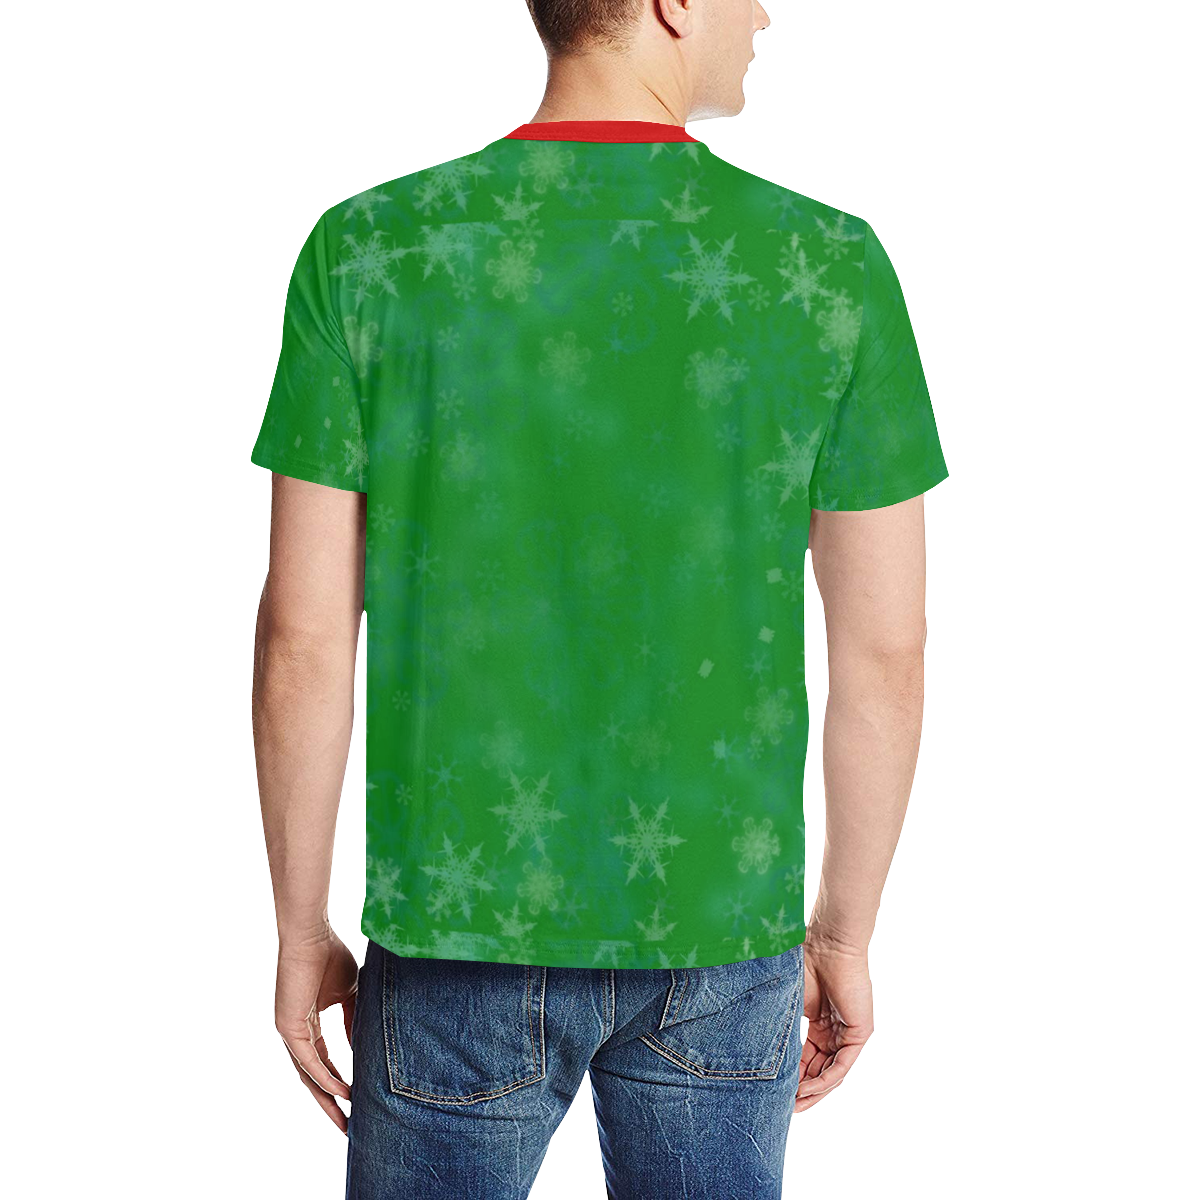 Weihnachten by Nico Bielow Men's All Over Print T-Shirt (Solid Color Neck) (Model T63)